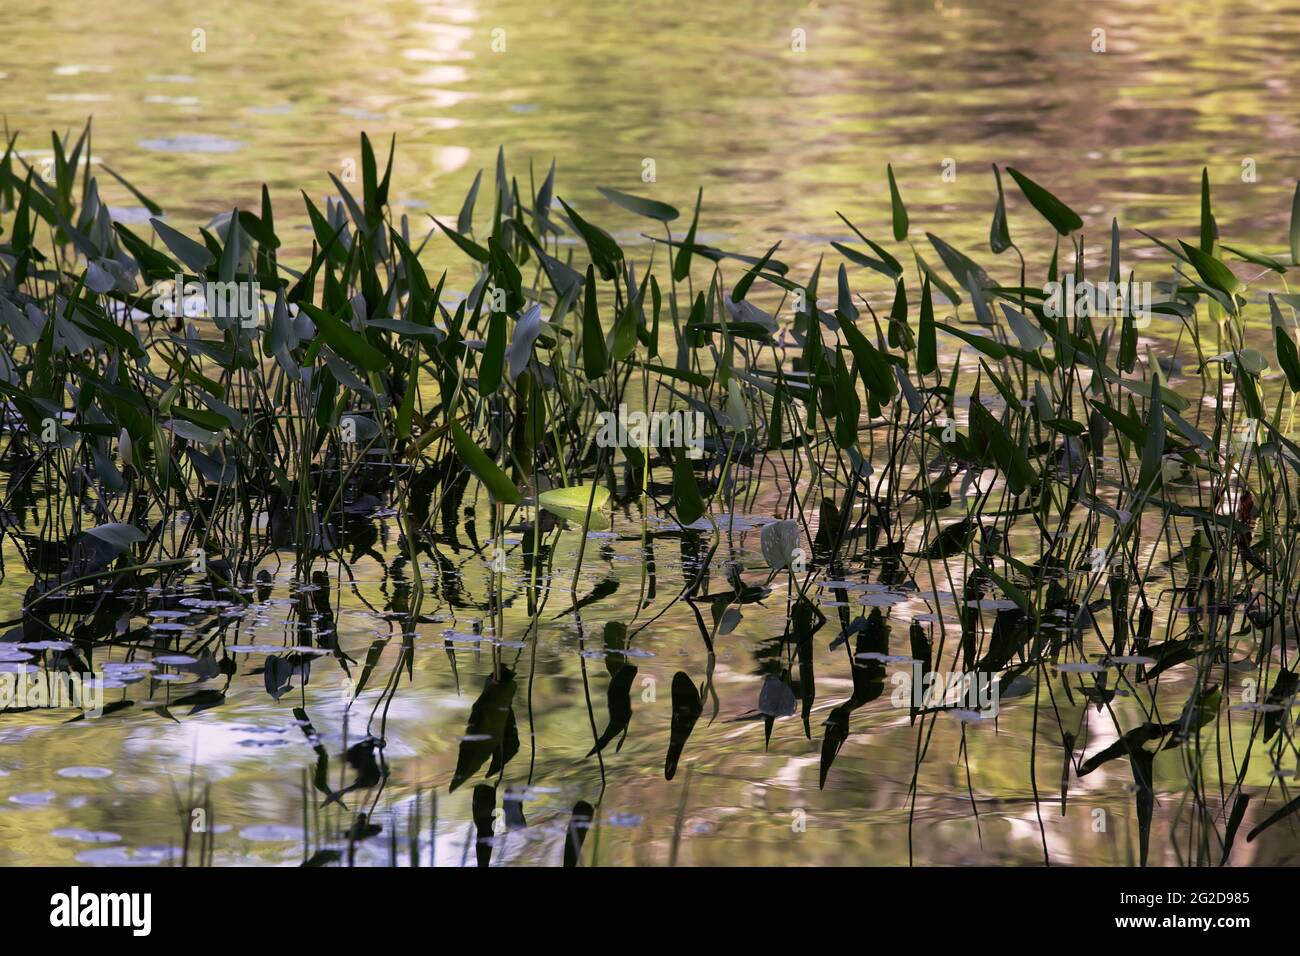 A lake with broad leaf arrowhead plants growing on Waters Edge Stock Photo